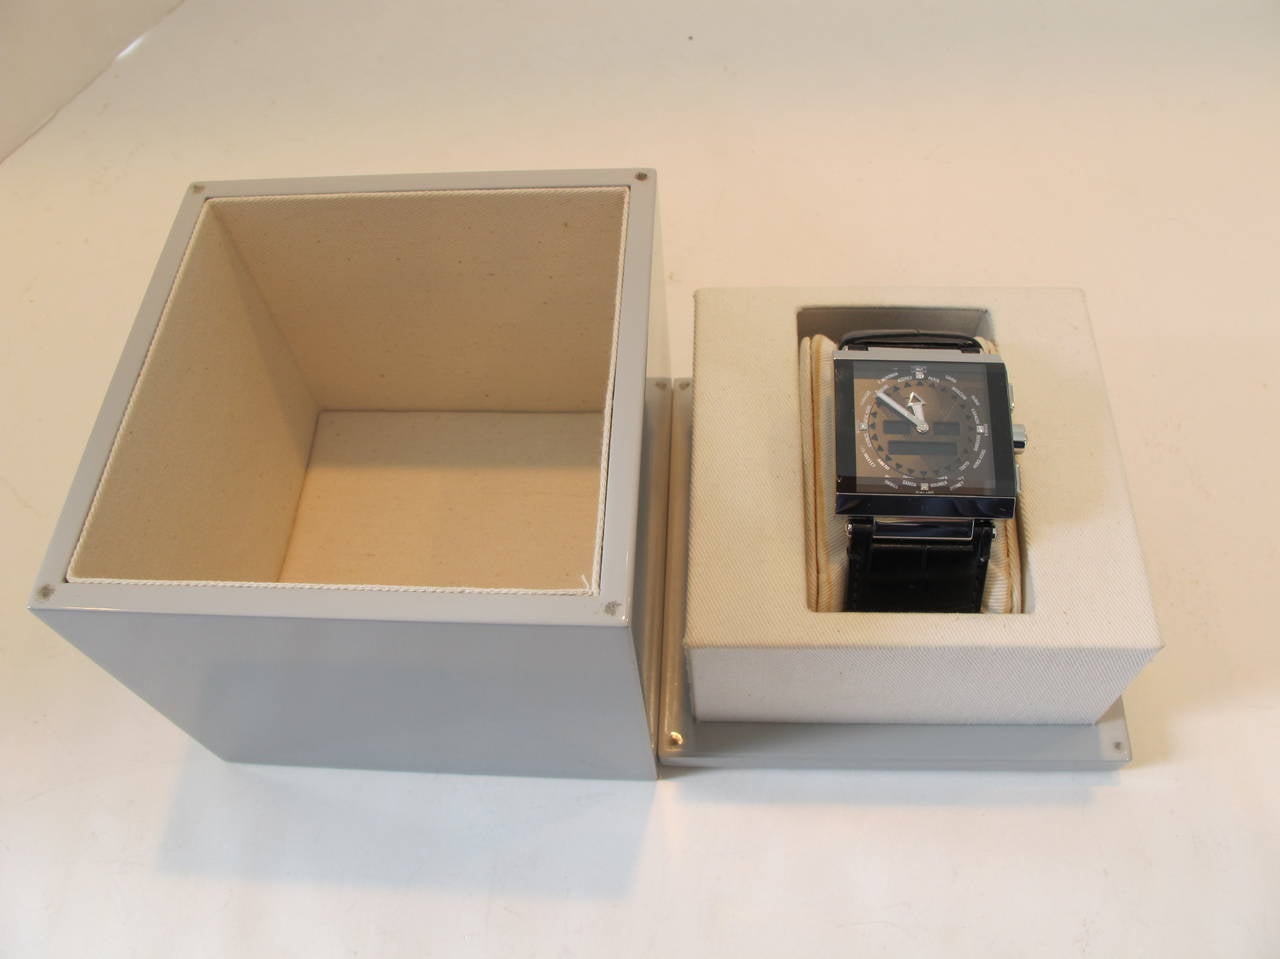 New Reed Krakoff Diamond International Time Watch with Alligator Watchband For Sale 1